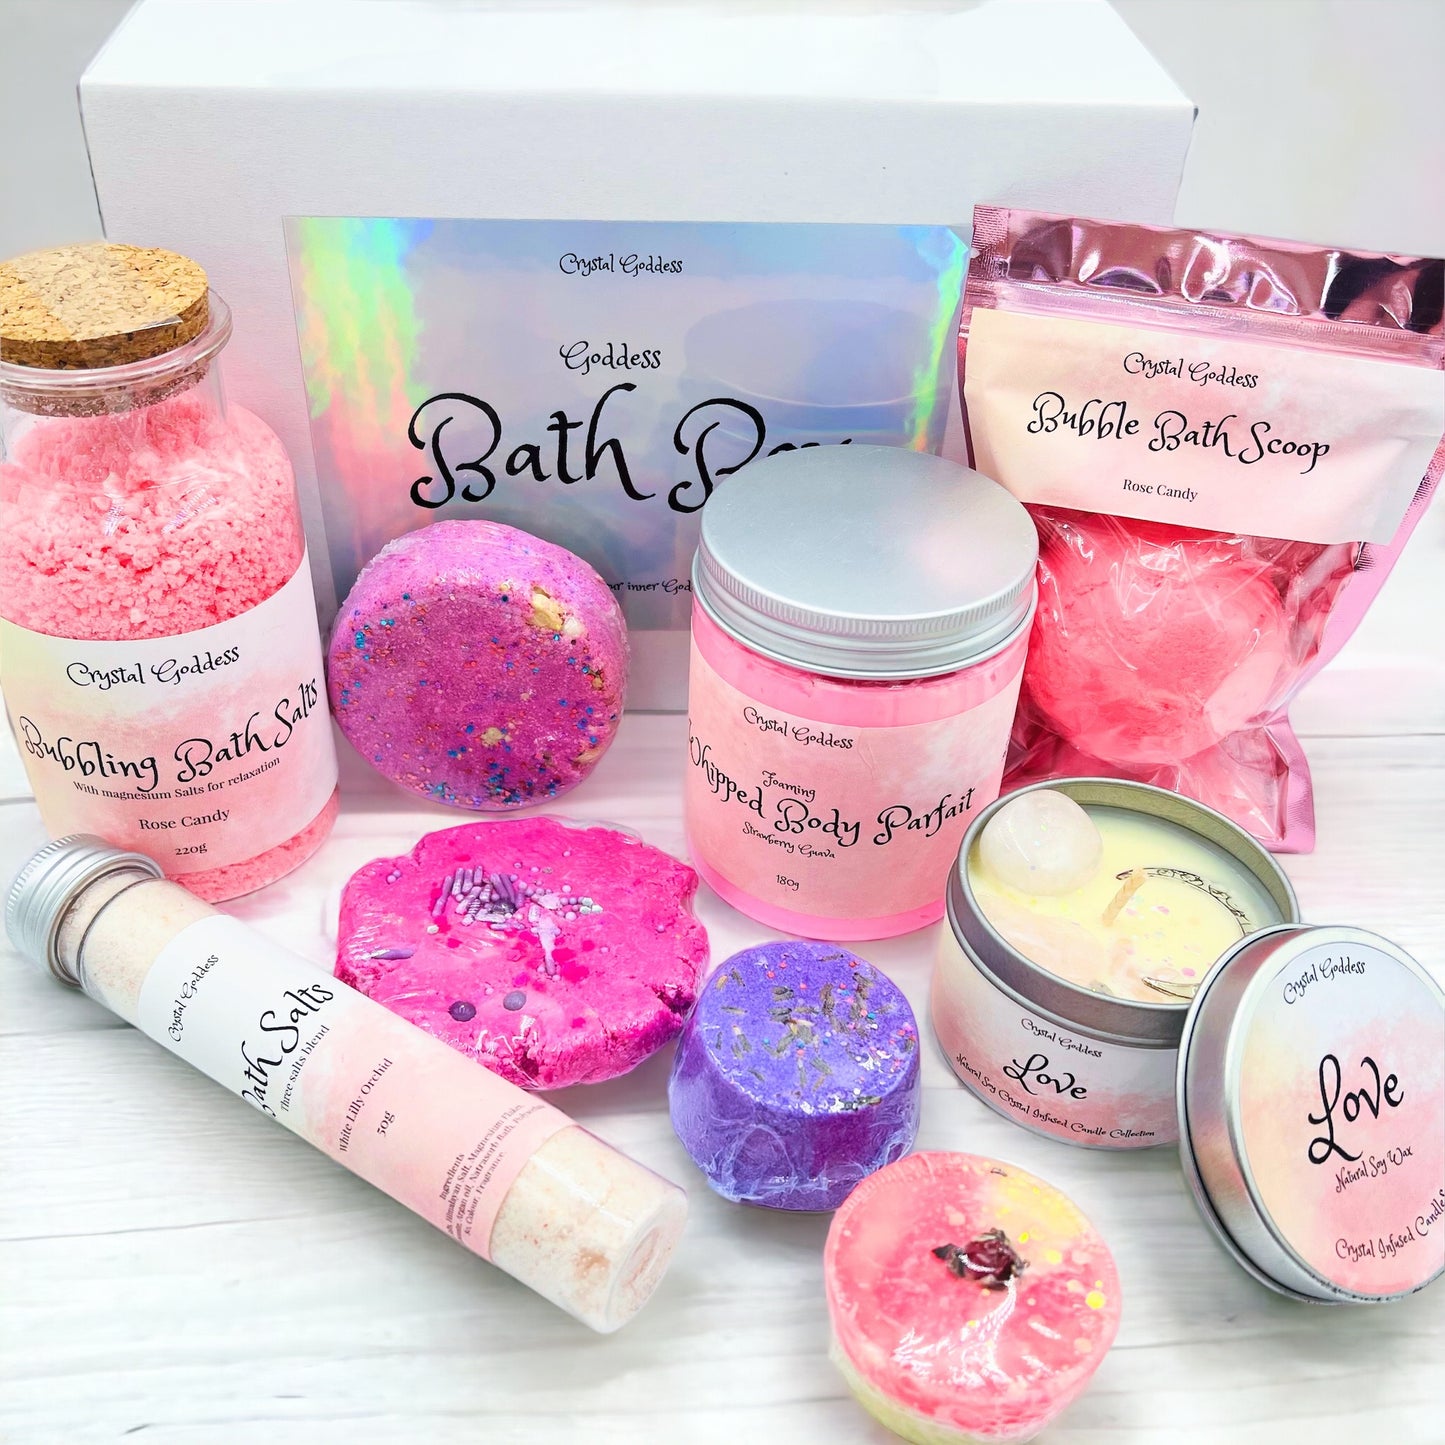 Bath Gift Box with Love Candle